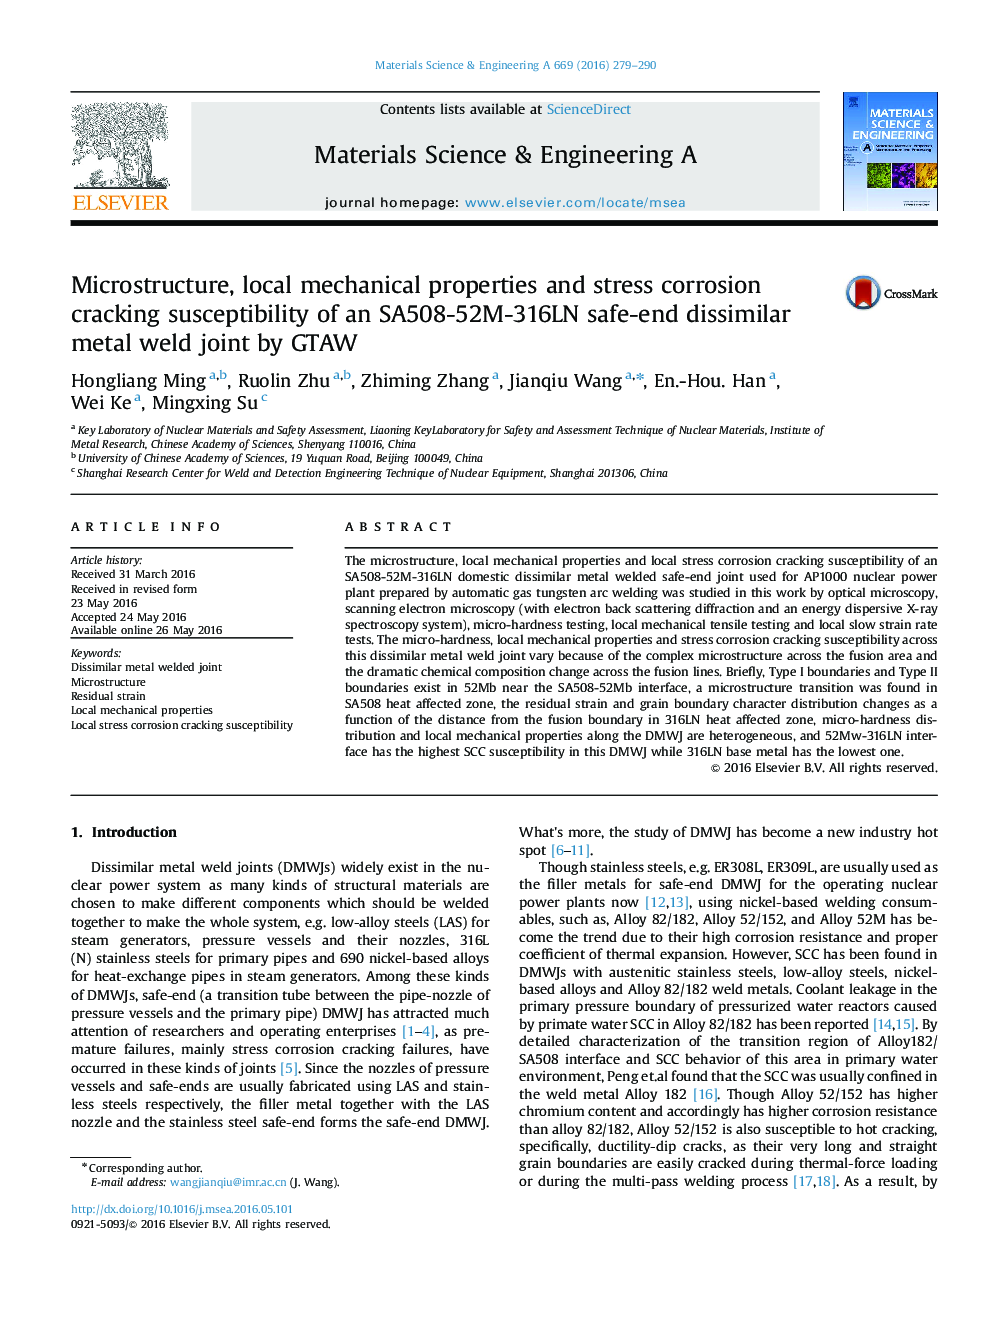 Microstructure, local mechanical properties and stress corrosion cracking susceptibility of an SA508-52M-316LN safe-end dissimilar metal weld joint by GTAW